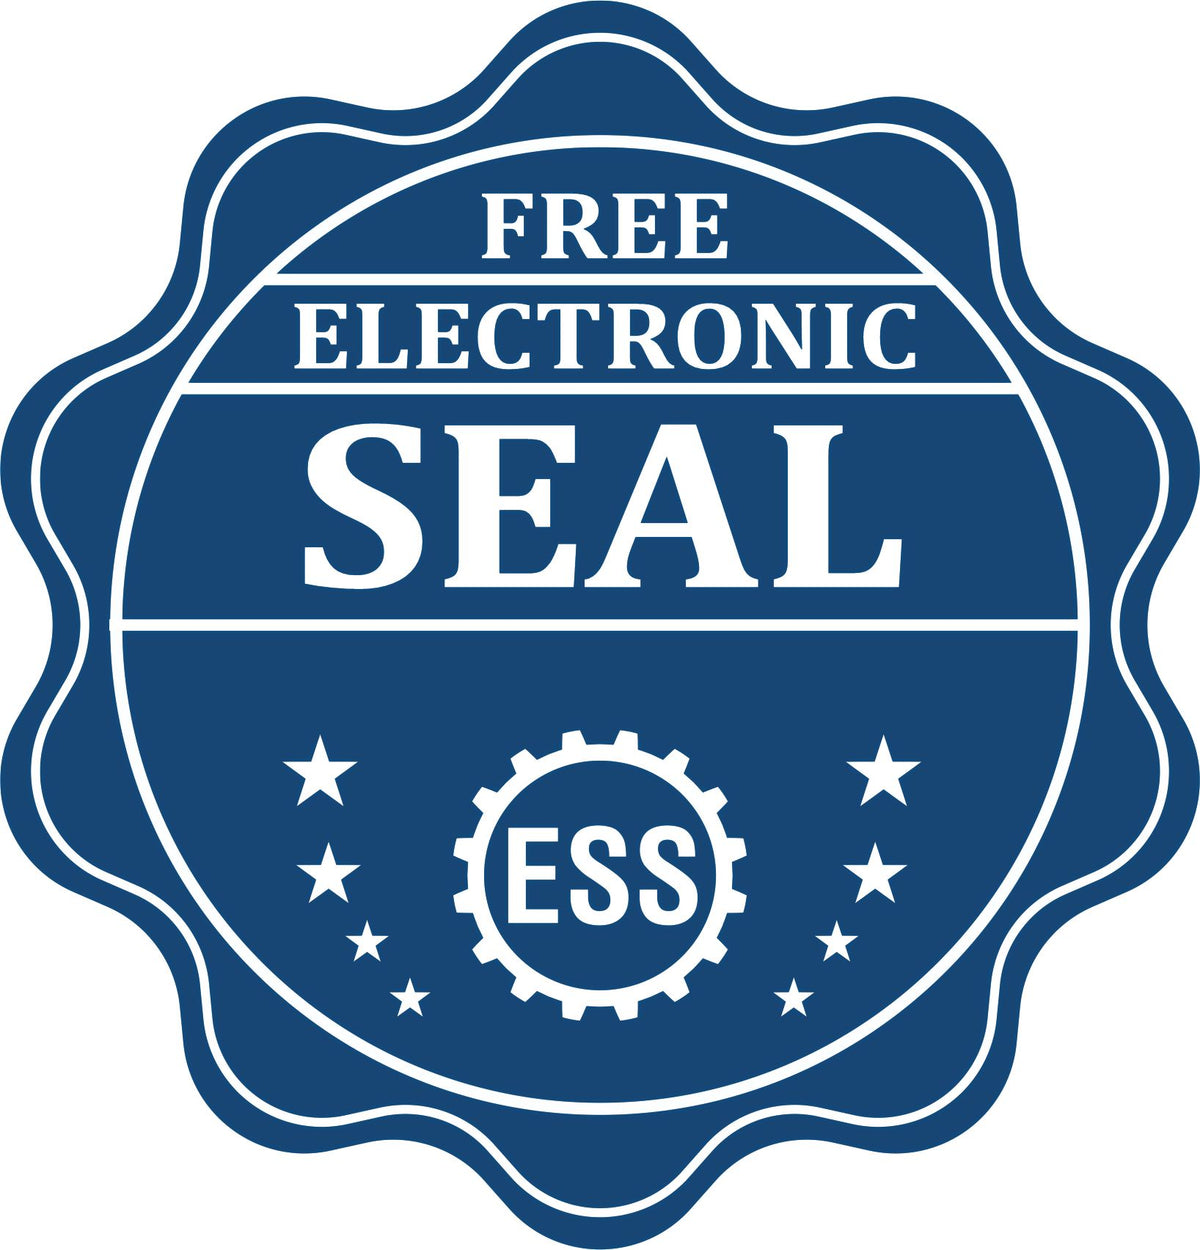 A badge showing a free electronic seal for the Long Reach North Carolina Geology Seal with stars and the ESS gear on the emblem.